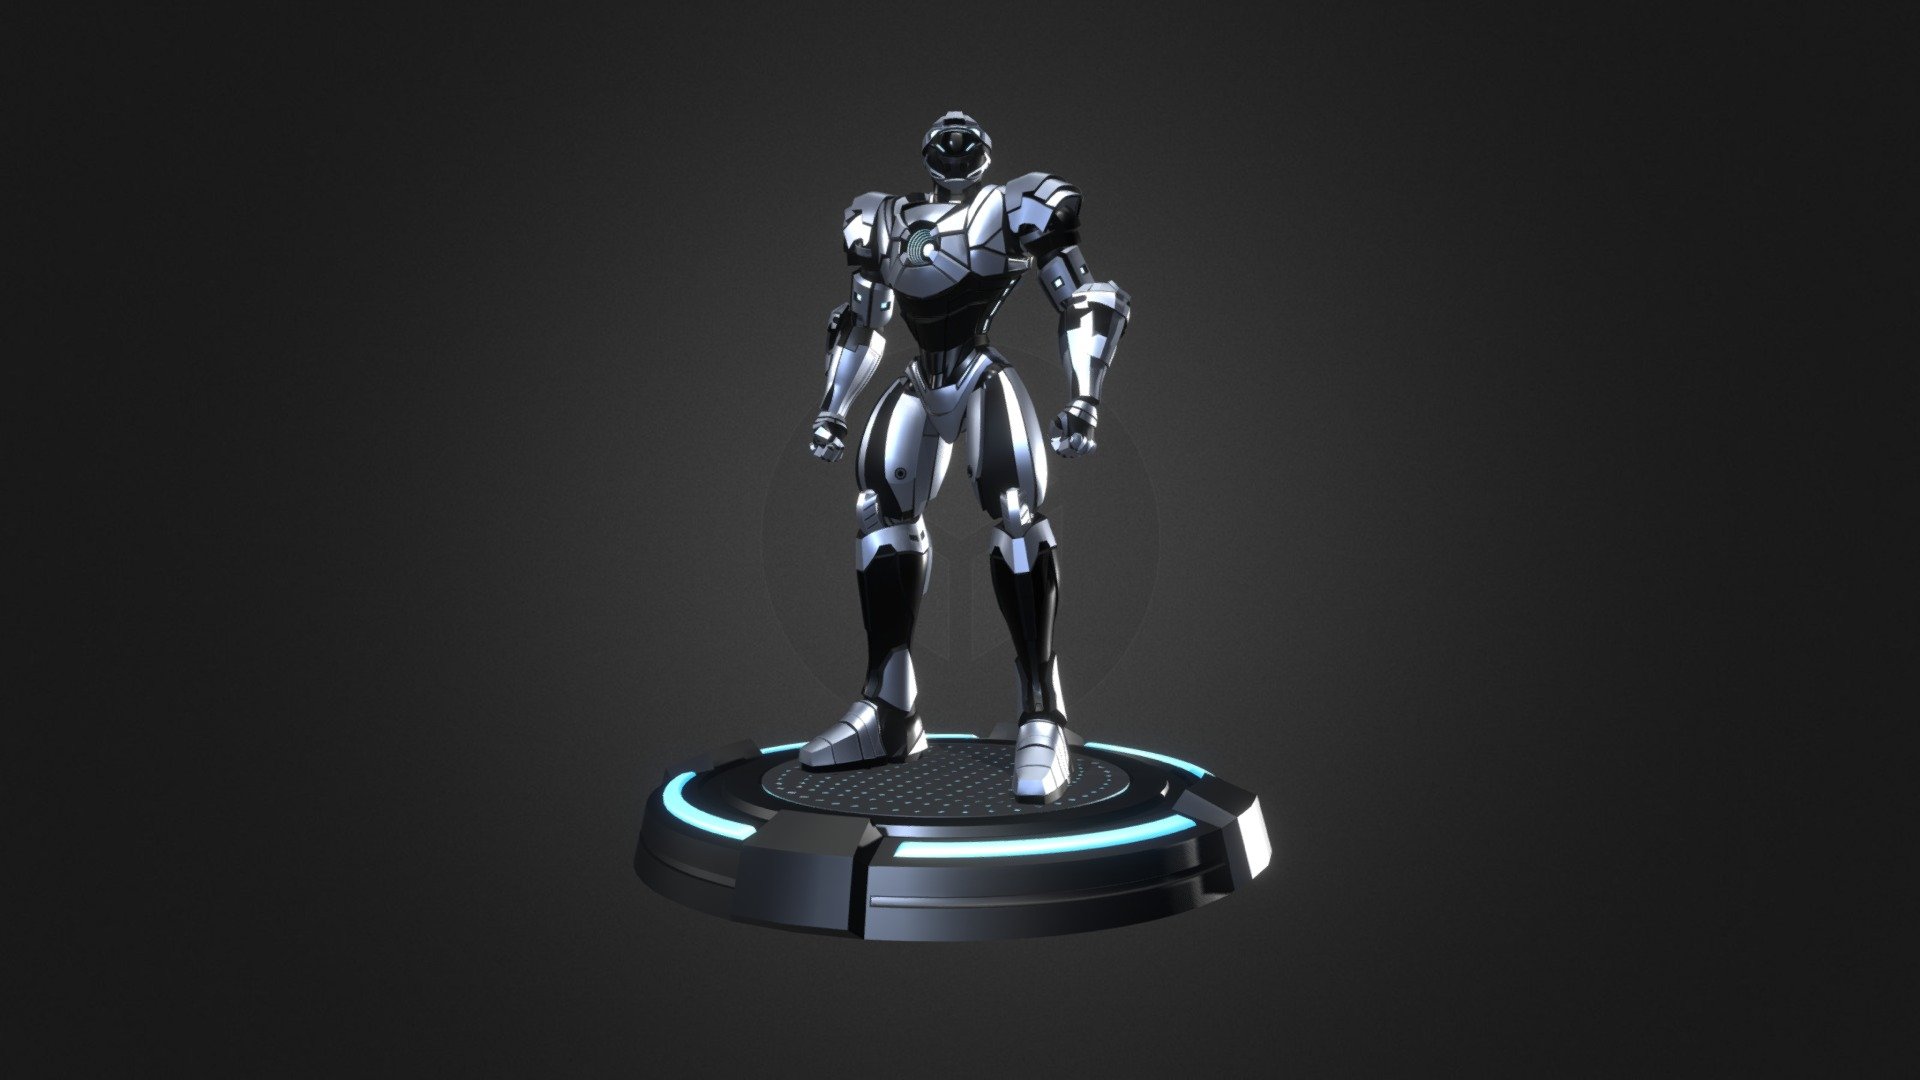 Sci-fi robotic character model, suitable for games and subdivision-ready for films or close up. Comes with full rig in both Maya file and Blender file. PBR textures all in 4096*4096 quality.

In this package includes:





Maya file (.MA, .MB) with rigs made with Advanced Skeleton




Blender file (.BLEND) with rigs and IK controllers, pose library with 4 standard pre-made poses. Also included a scifi-style pedestal for showcase render, which can also be downloaded separately in the &ldquo;Supporting items